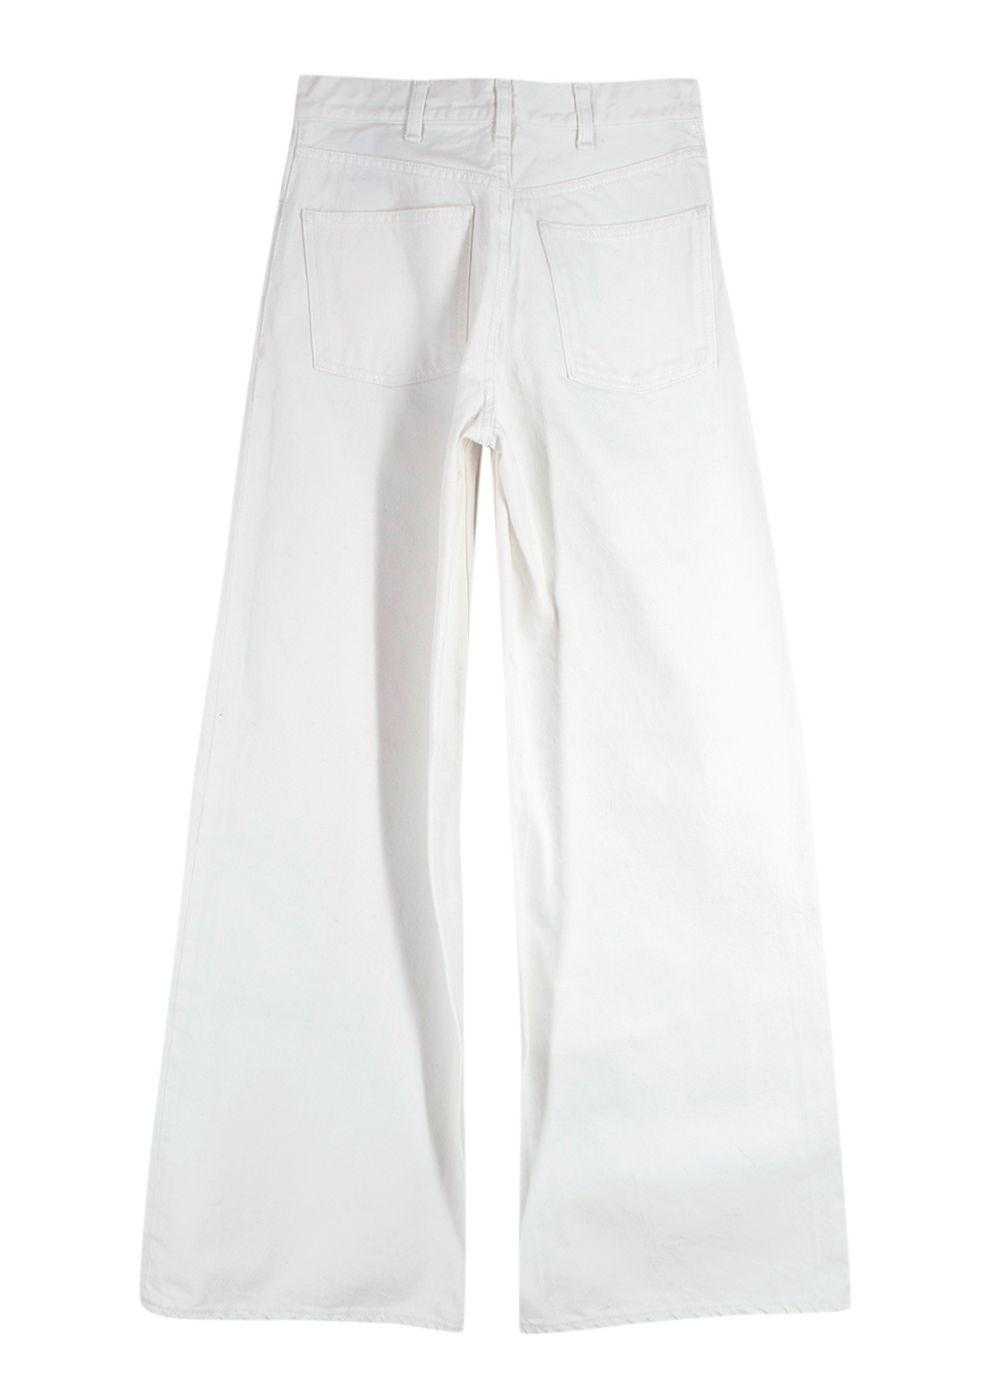 Managed by hewi Celine White Wide Leg Jeans - image 2